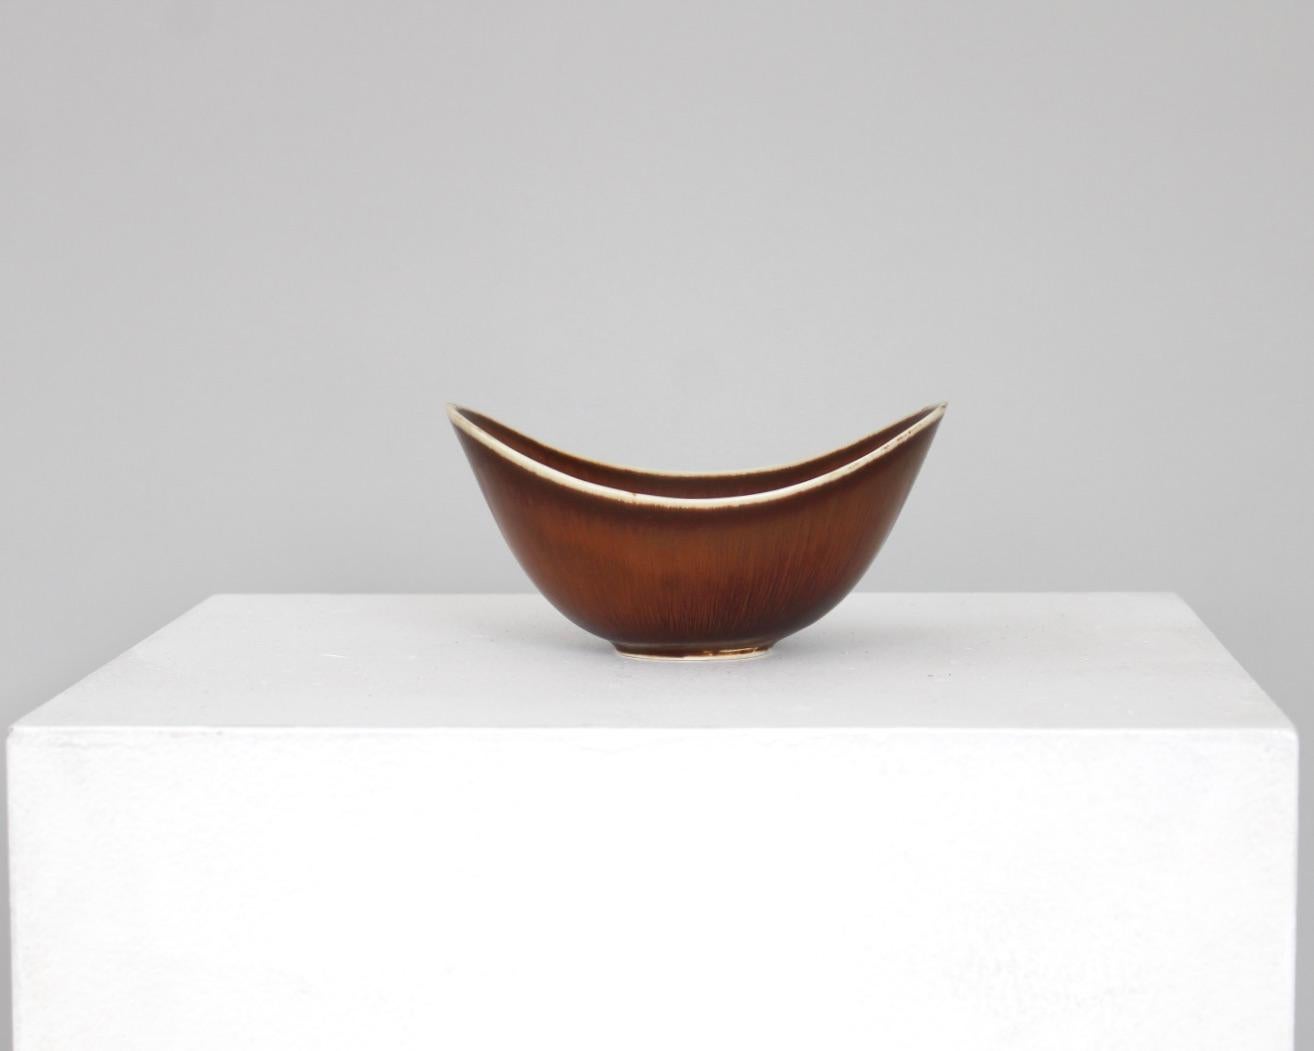 Medium size ARO bowl created and designed by Gunnar Nylund at the Rörstrand Factory in the 1950s, Sweden.
Brown hares fur glaze breaking to blacks with beautiful white rim. 
Excellent condition. No chips.